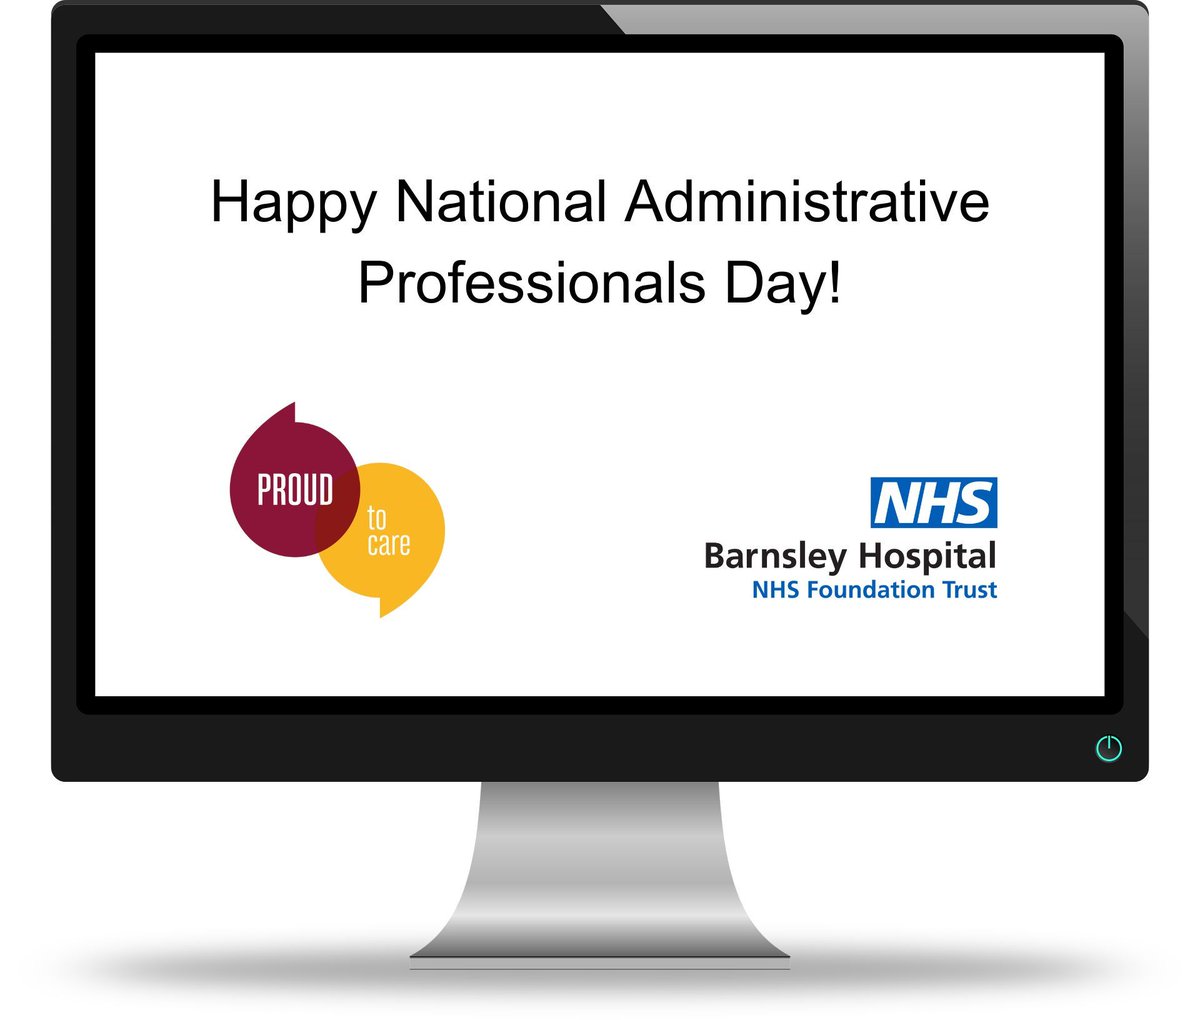 Happy #NationalAdministrativeProfessionalsDay! A big thank you to all our administrative staff across The Trust who work tirelessly behind the scenes ensuring teams & departments run smoothly & efficiently. Visit the Hub for a message from our Chief Executive Dr Richard Jenkins.